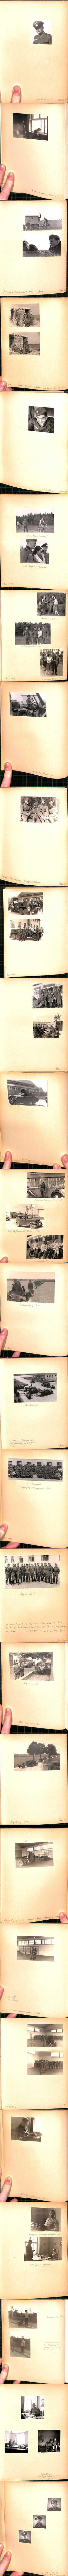 (a68593) Photo Album 2nd World War II 1940, 44 photos, including bunkers, vehicles - Picture 1 of 1